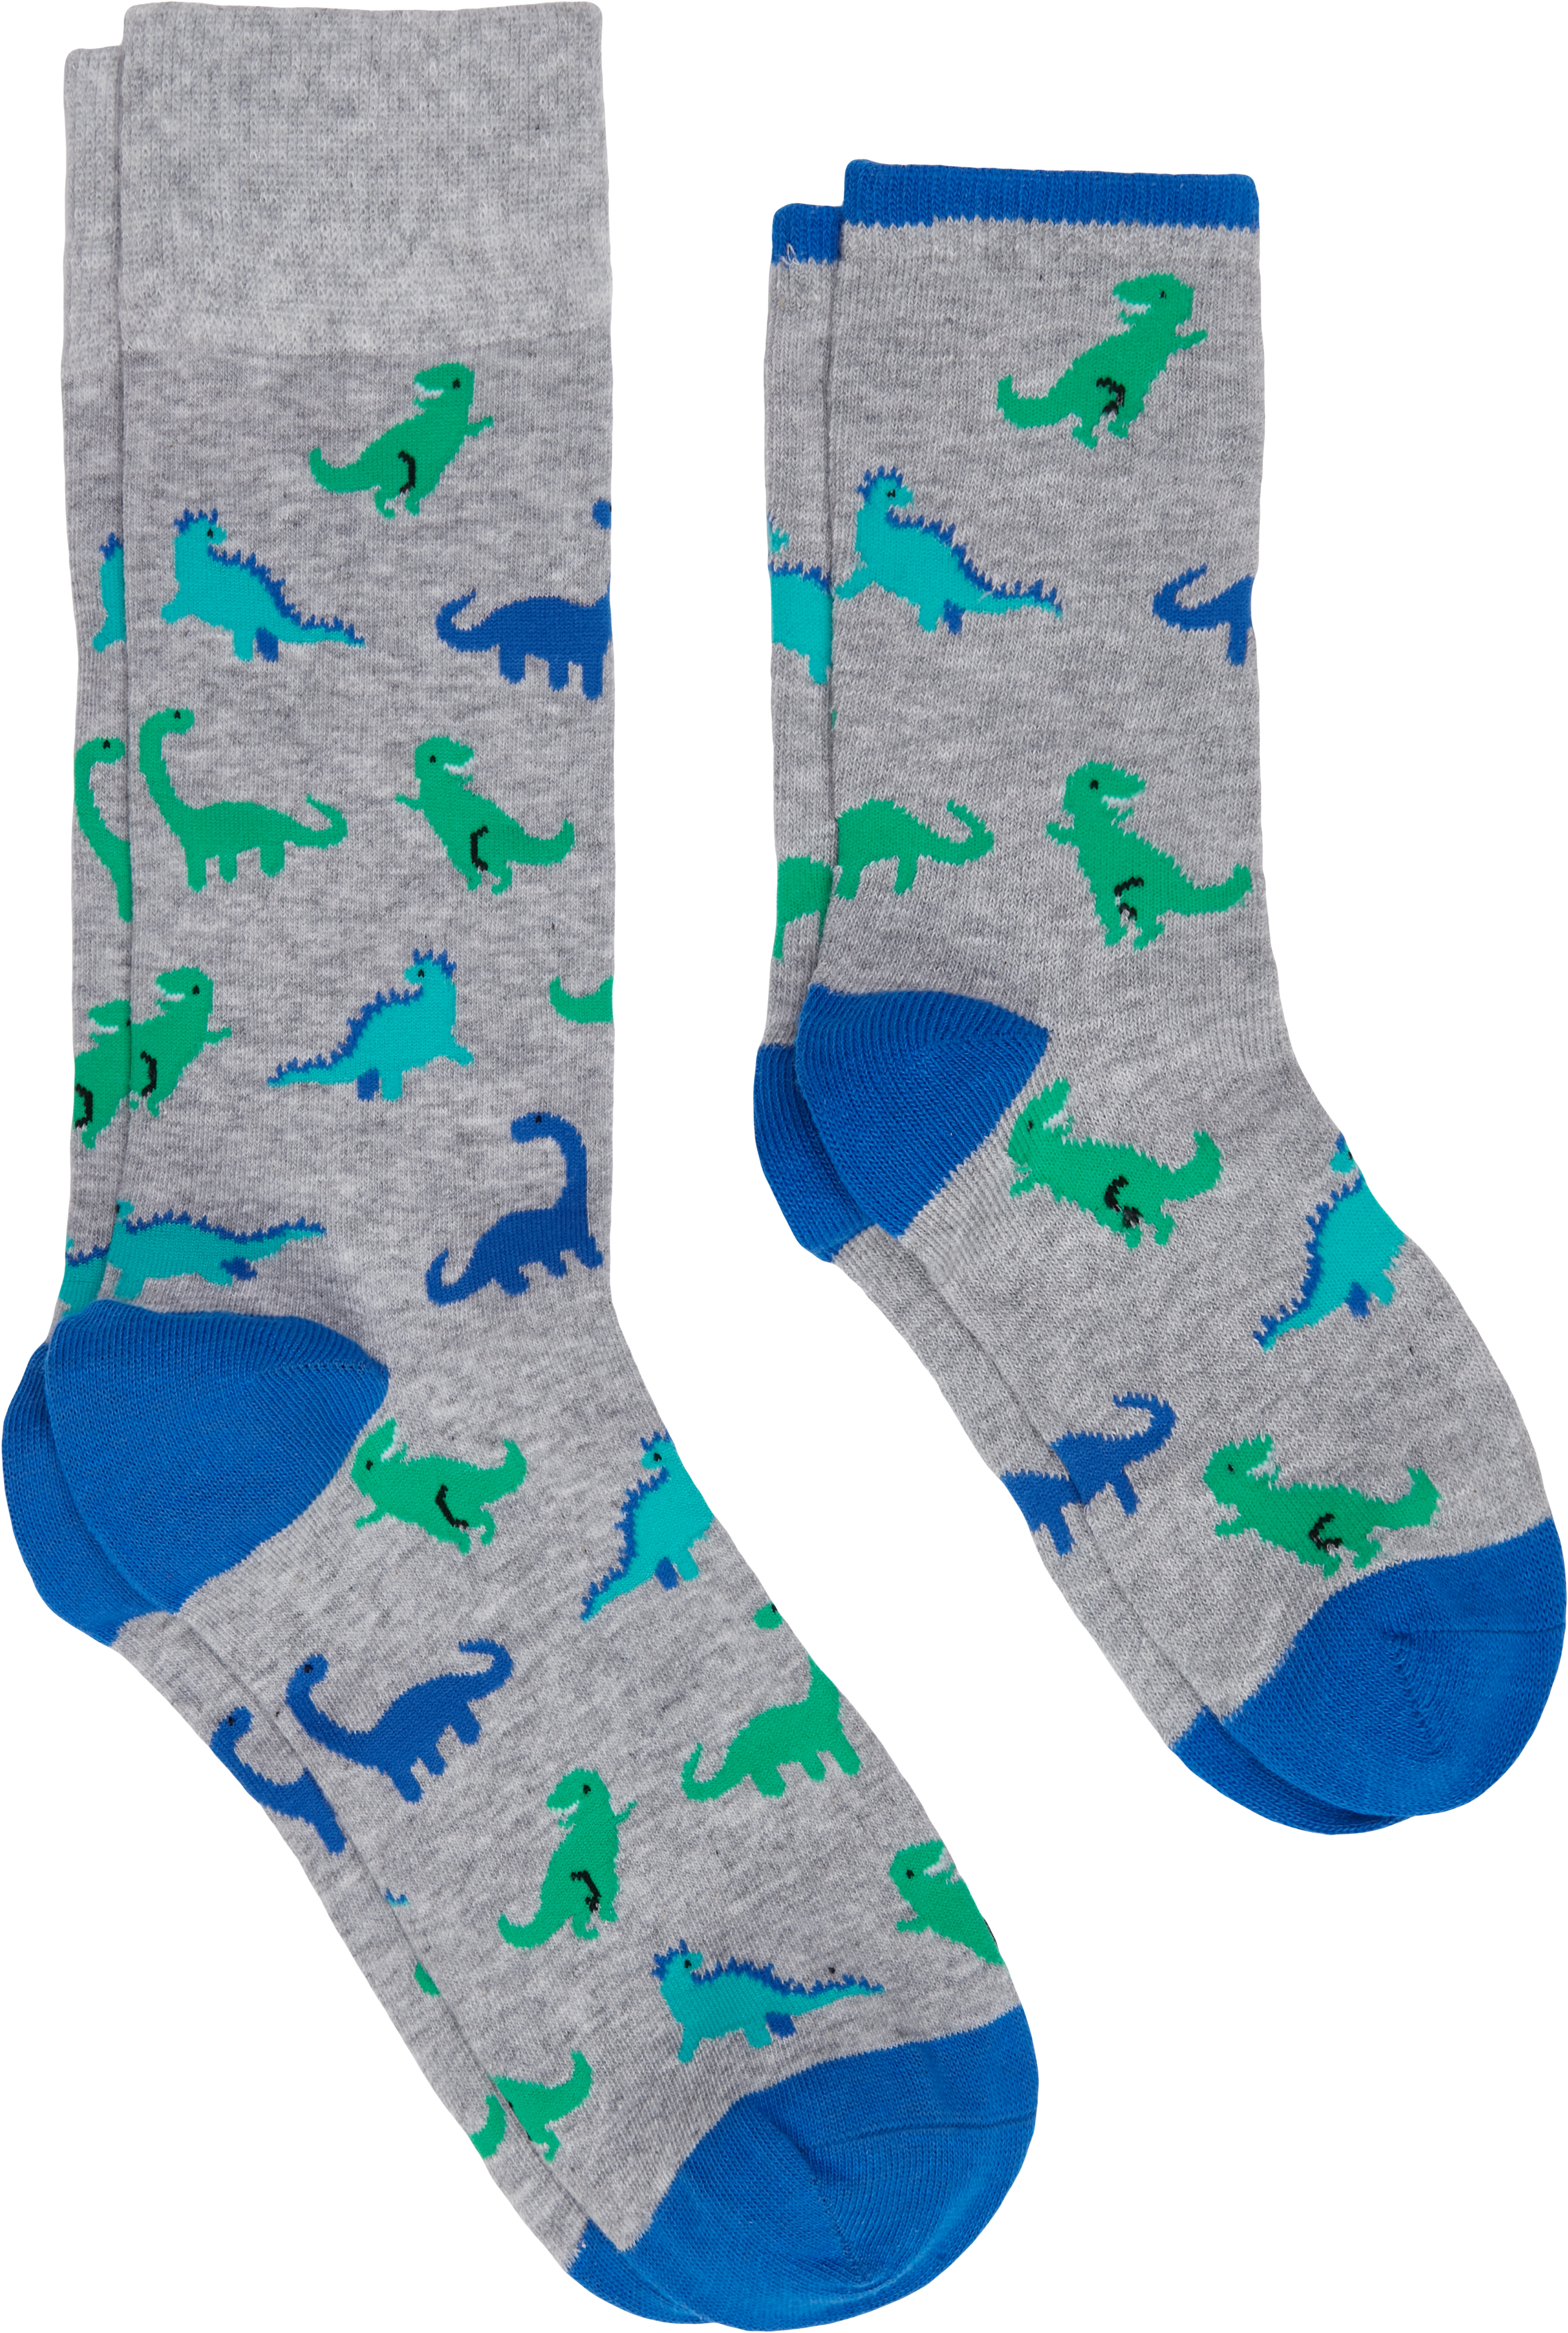 Adult and Child Socks 2-Pack